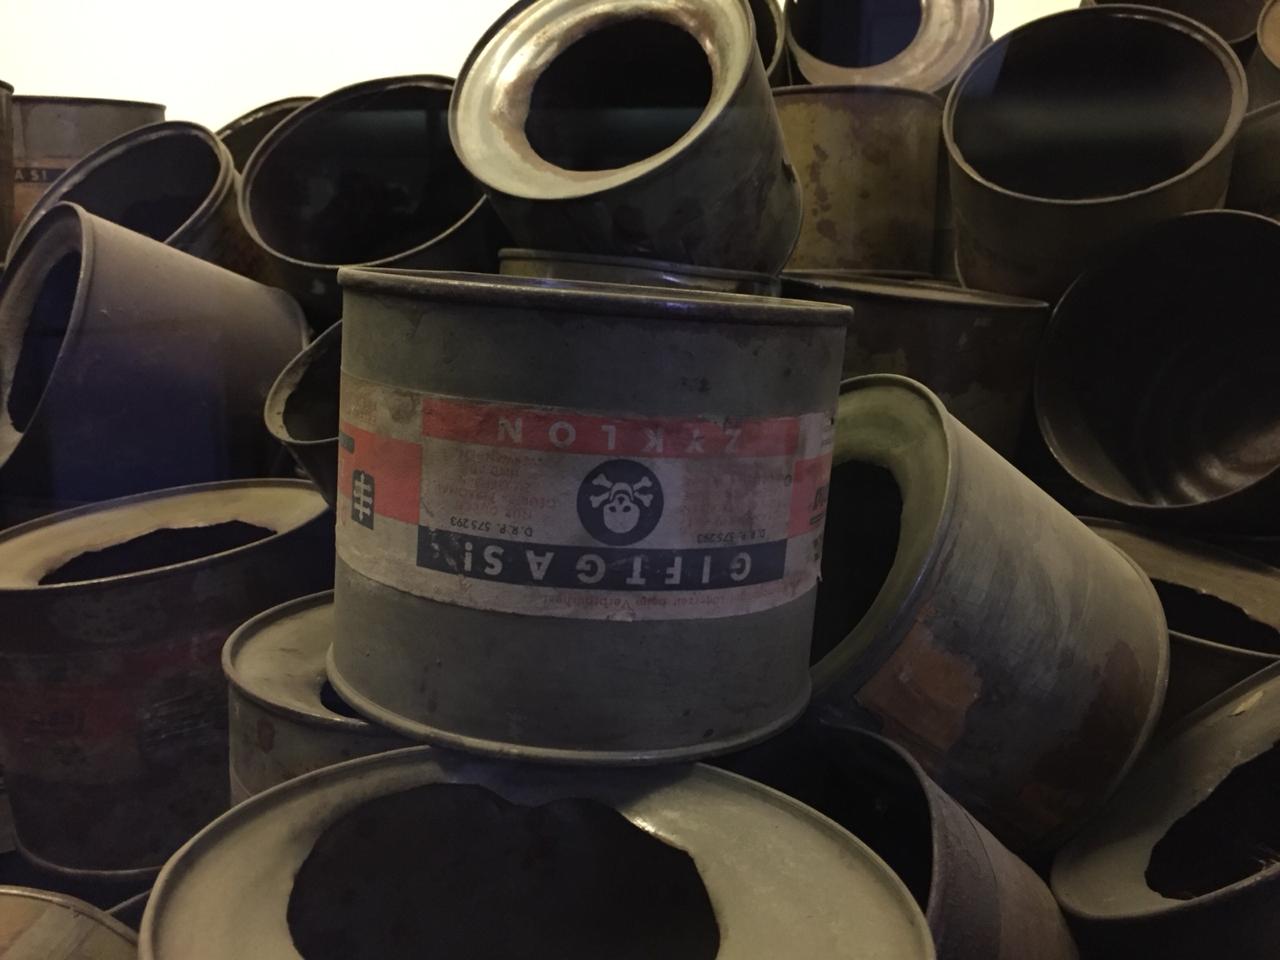 Cannisters of Zyklon-B gas on display at Auschwitz Museum